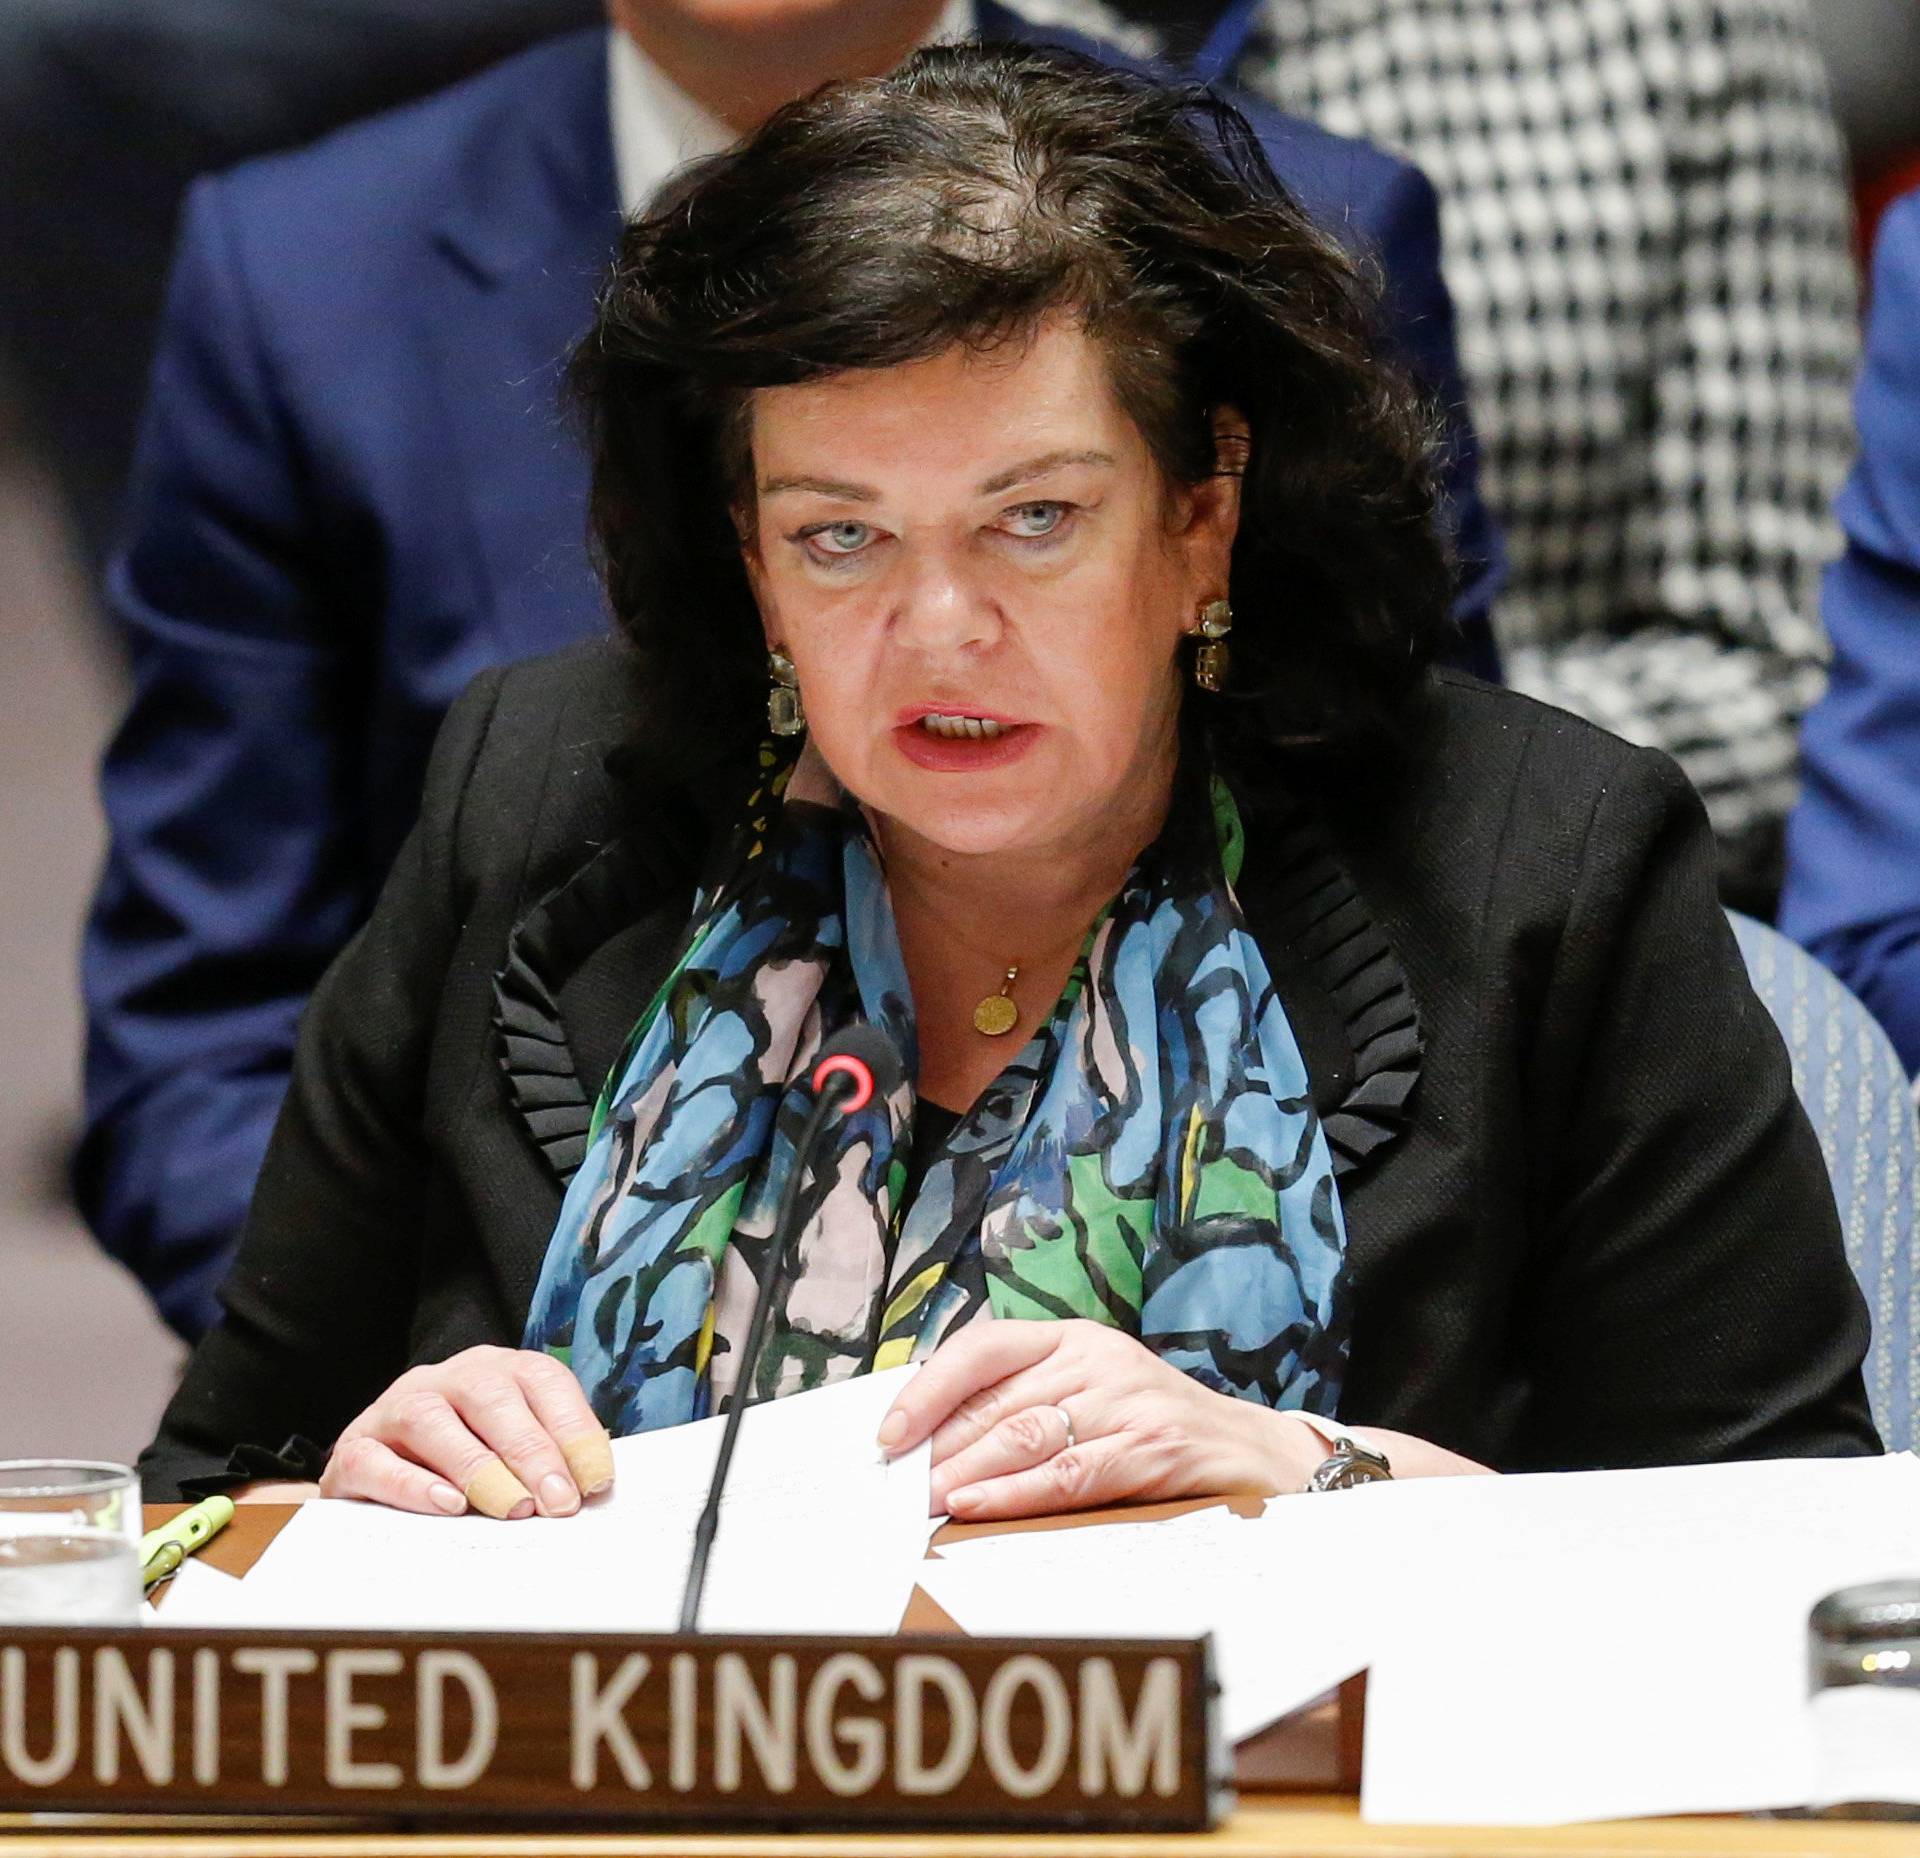 Pierce, UK Ambassador to the United Nations speaks during the emergency United Nations Security Council meeting on Syria at the U.N. headquarters in New York